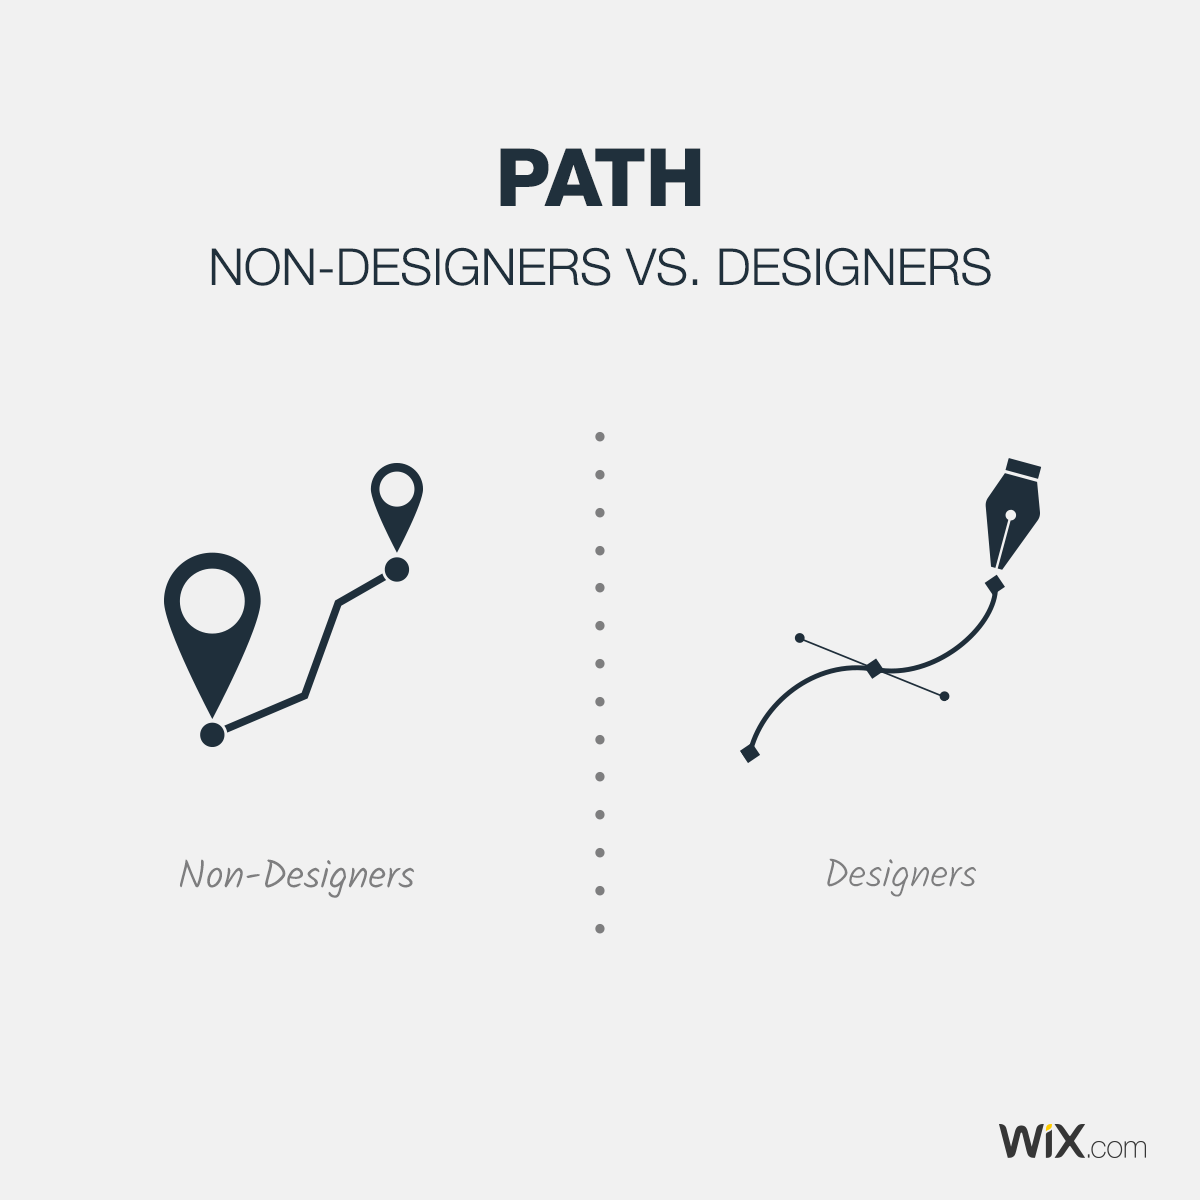 Differences Between Designers and Non-Designers - Path